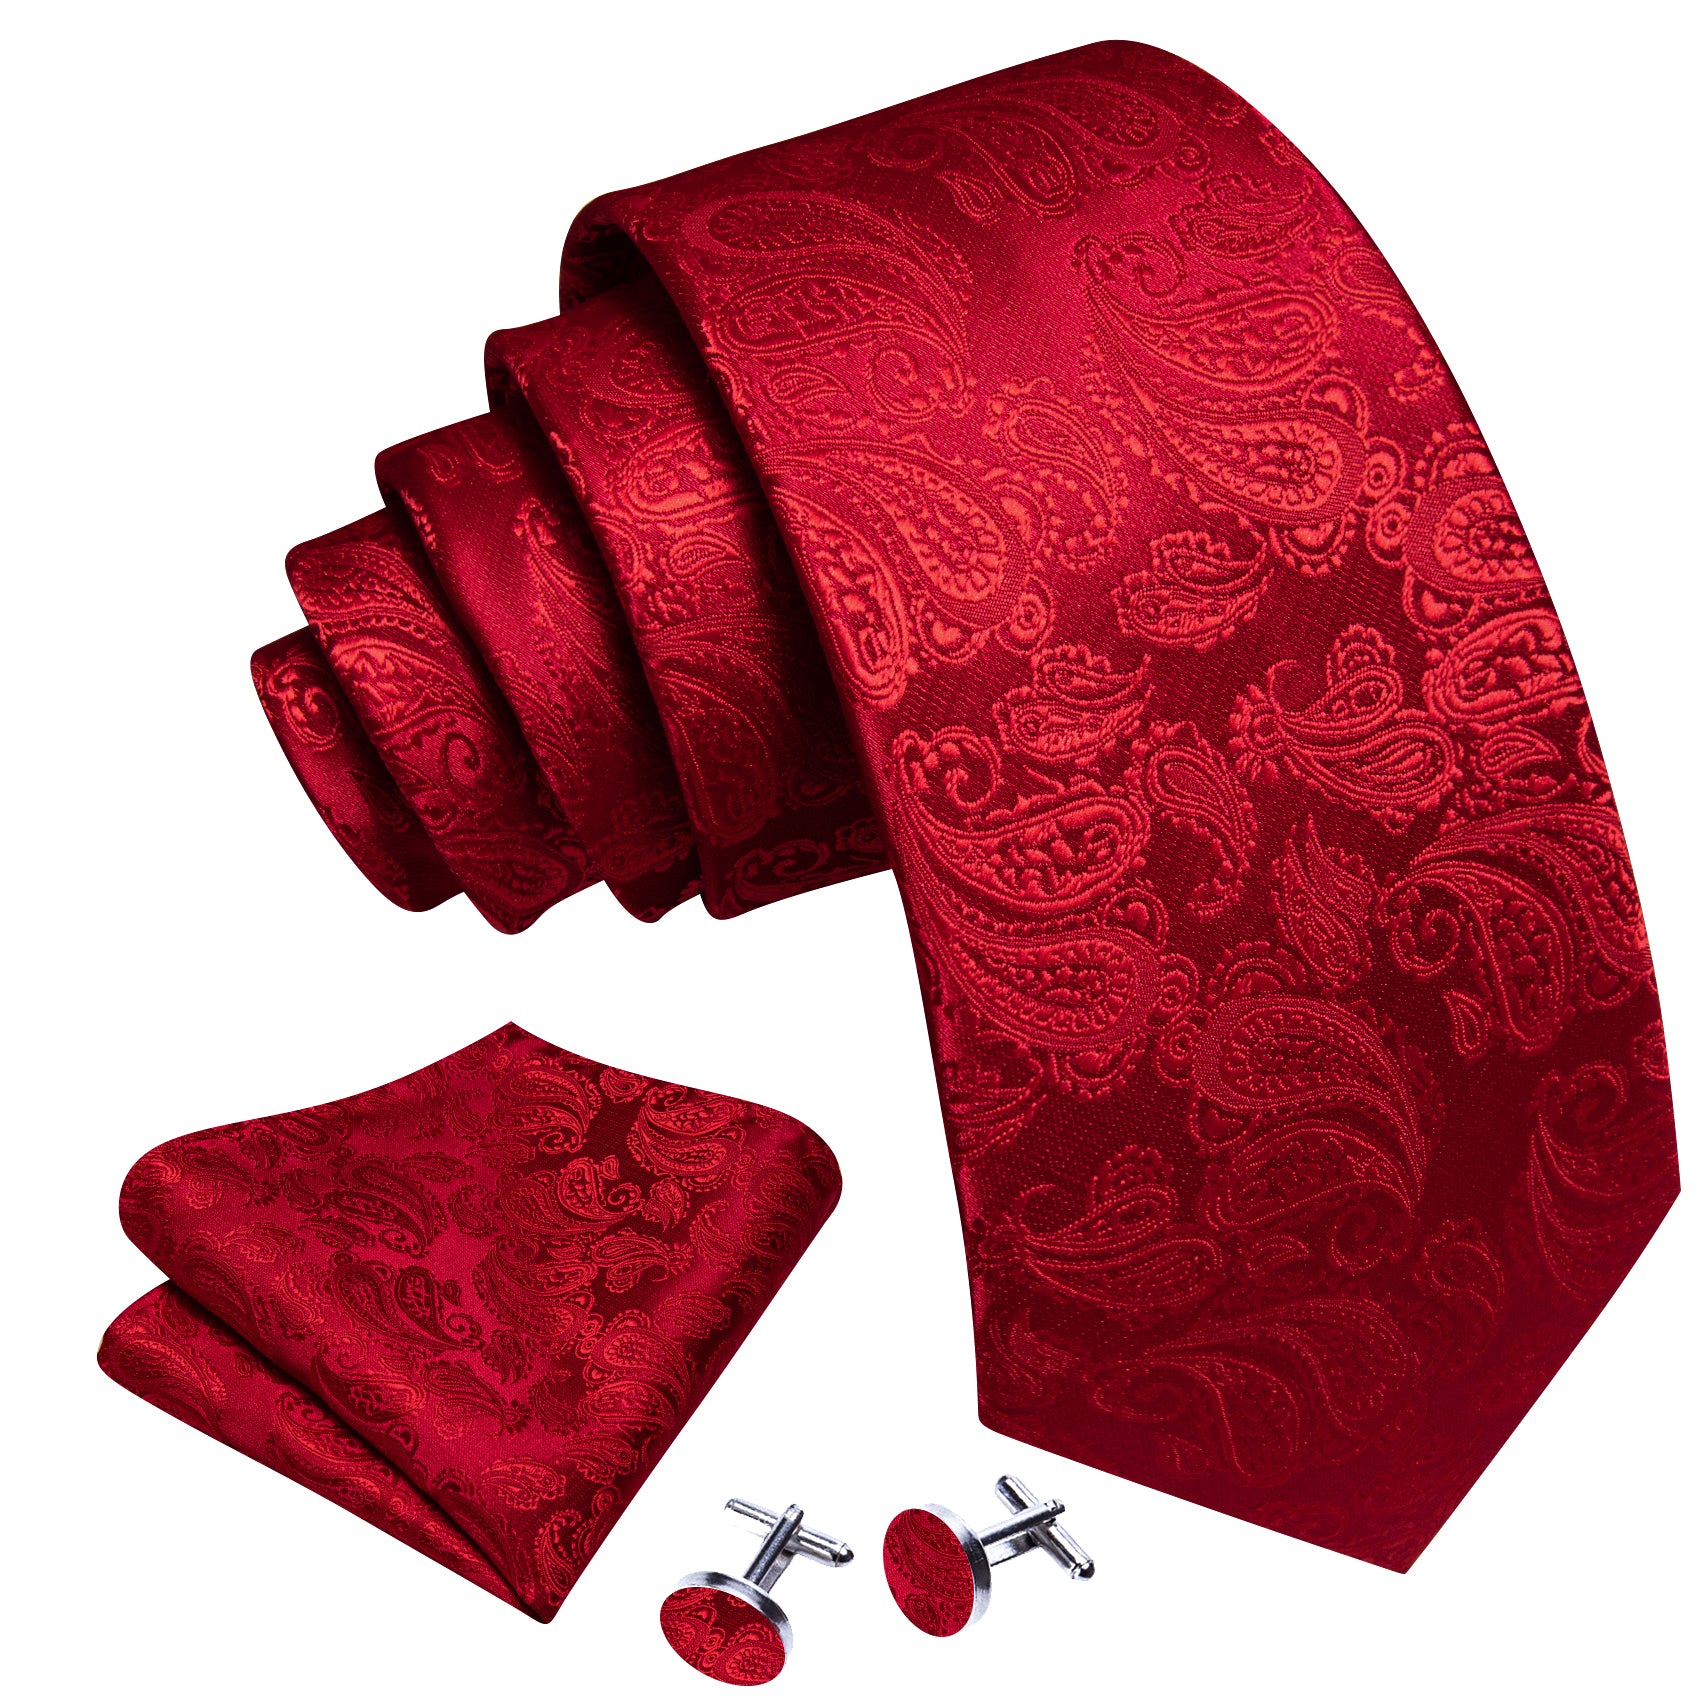 Red Paisley Silk 63 Inches Extra Long Tie Hanky Cufflinks Set